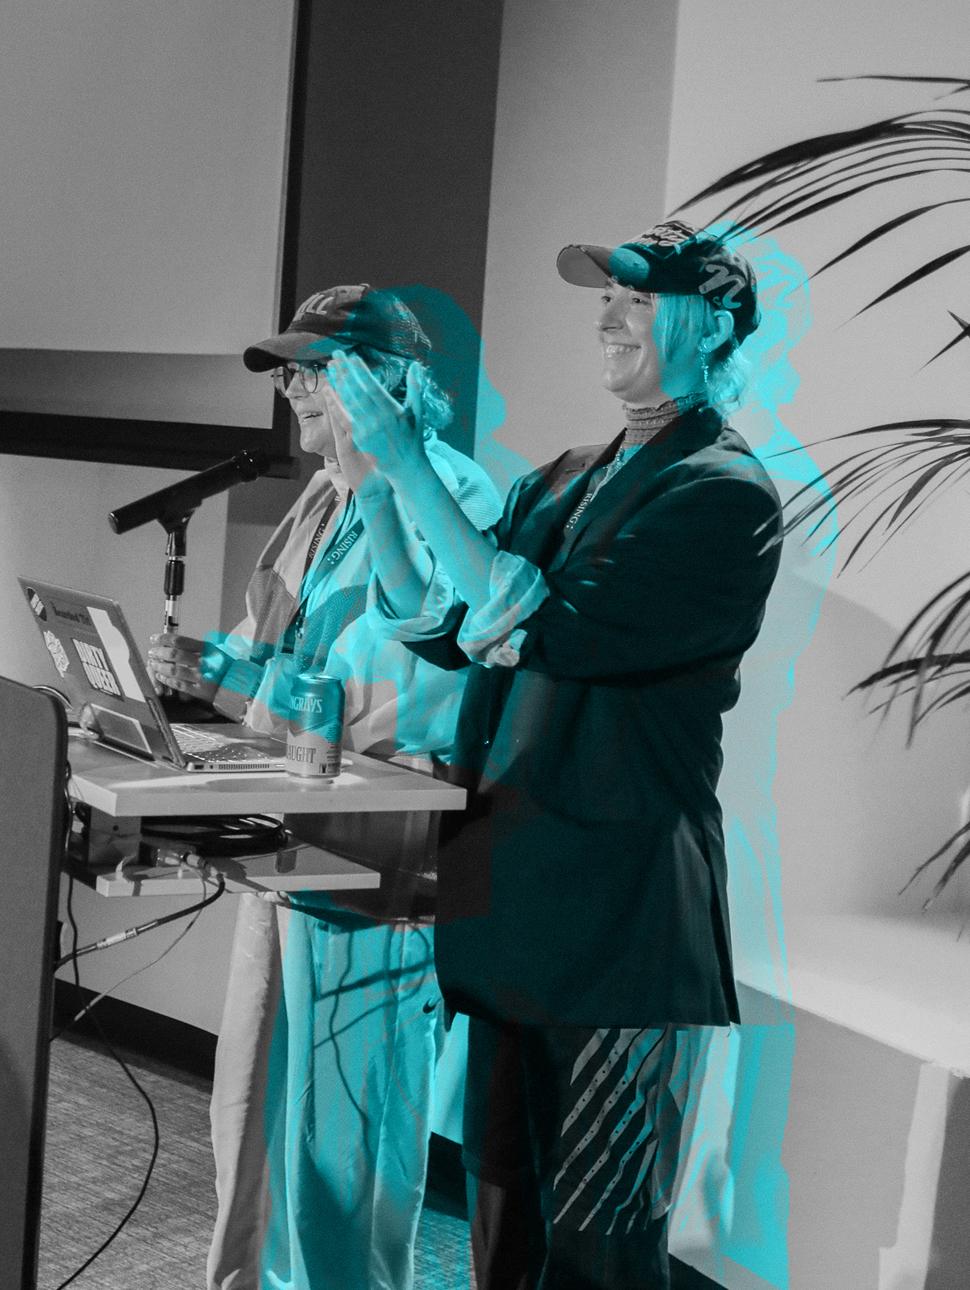 In a theater setting, two hosts are standing on a stage. In front of them, there is a laptop displaying a black and white image, which is overlaid with a vibrant and bright blue visual treatment.